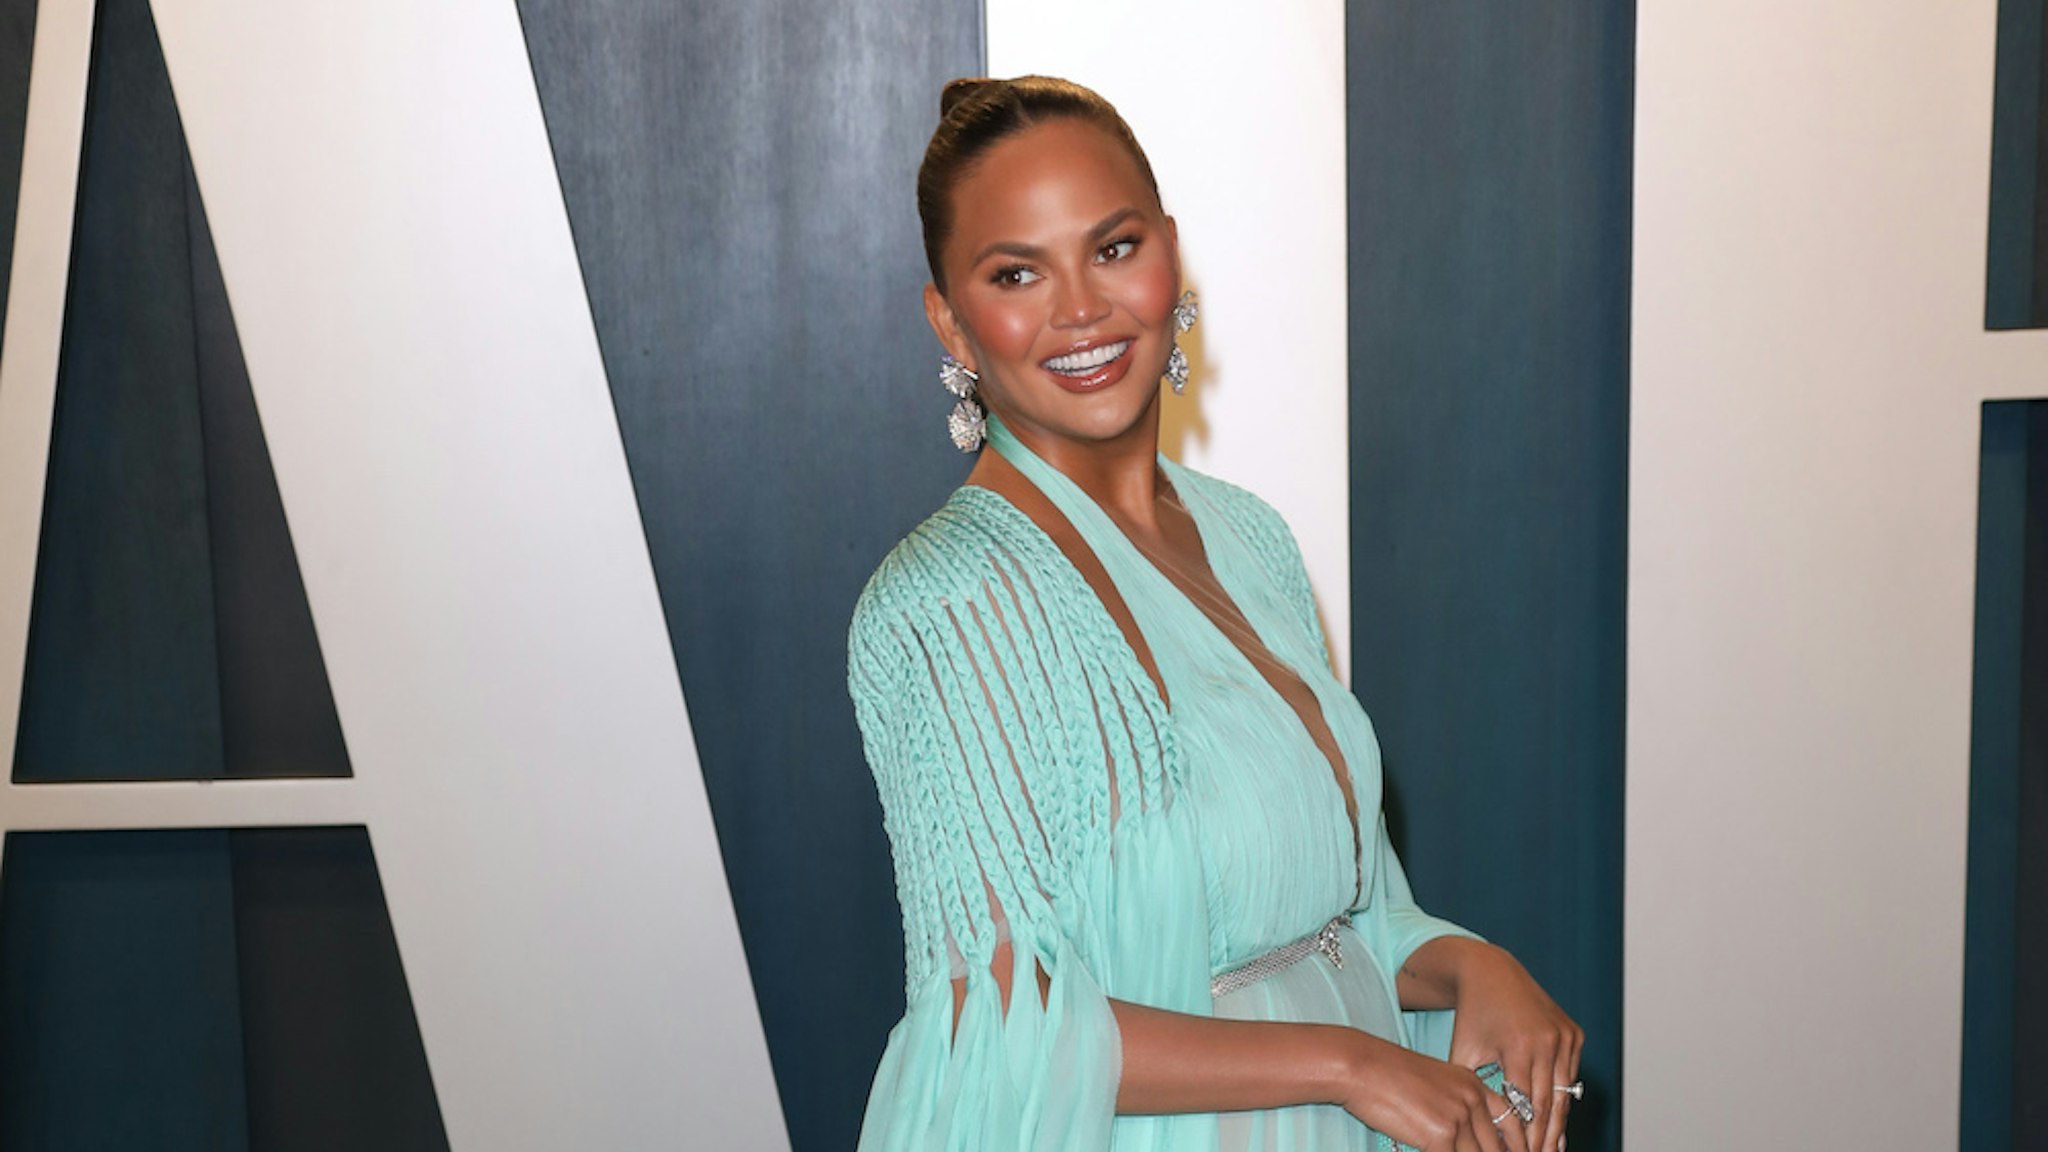 BEVERLY HILLS, CALIFORNIA - FEBRUARY 09: Chrissy Teigen attends the 2020 Vanity Fair Oscar Party at Wallis Annenberg Center for the Performing Arts on February 09, 2020 in Beverly Hills, California. (Photo by Toni Anne Barson/WireImage)